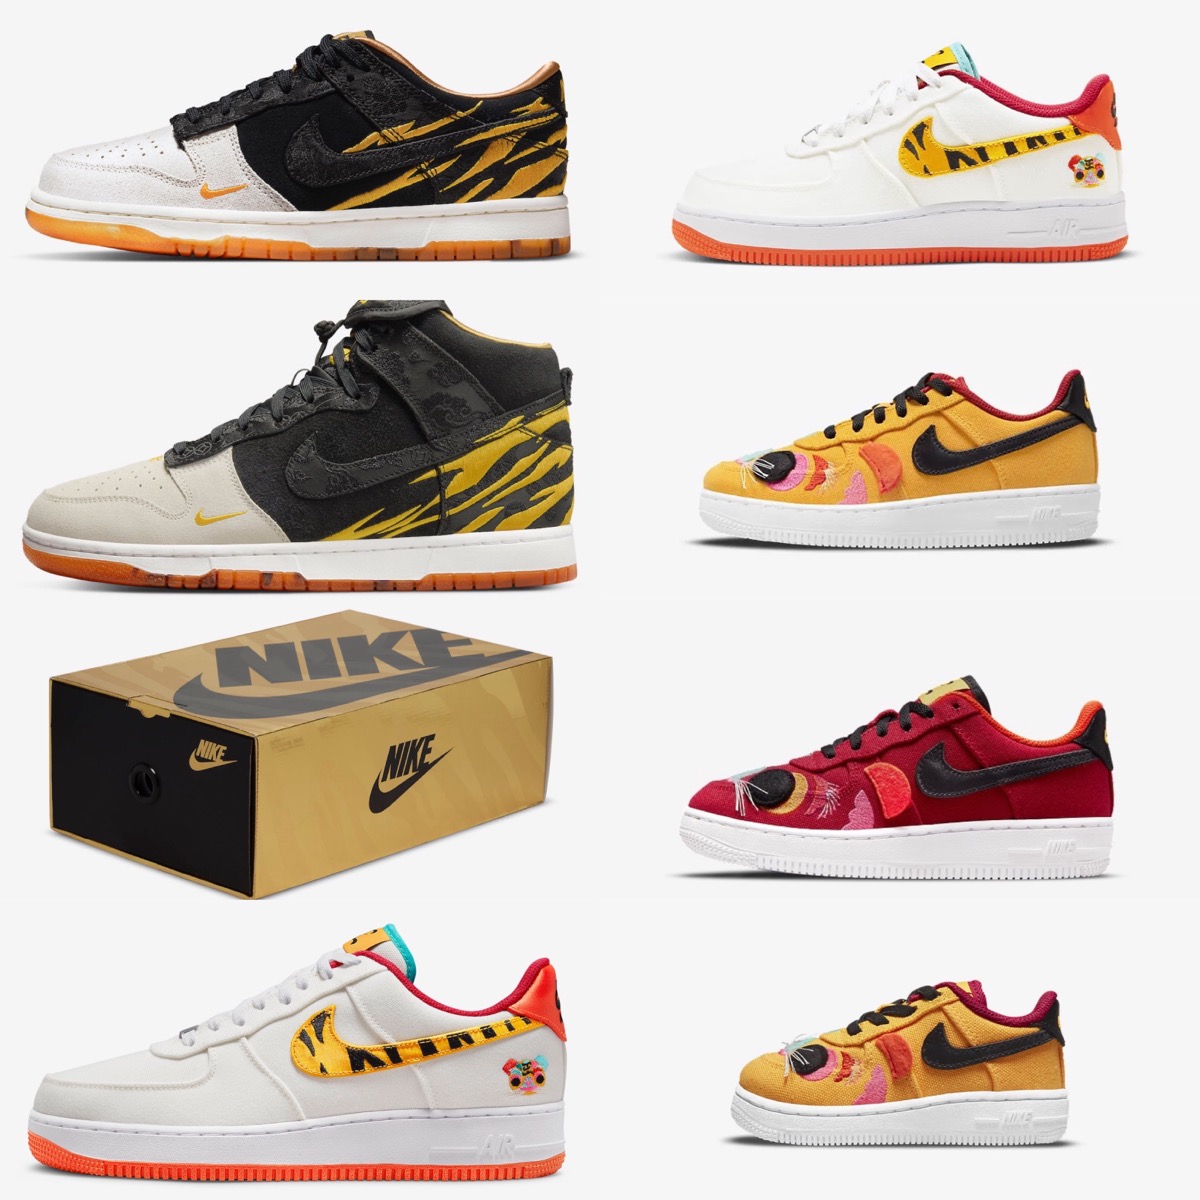 Nike】“Year of the Tiger” Collectionが国内1月28日より順次発売予定 